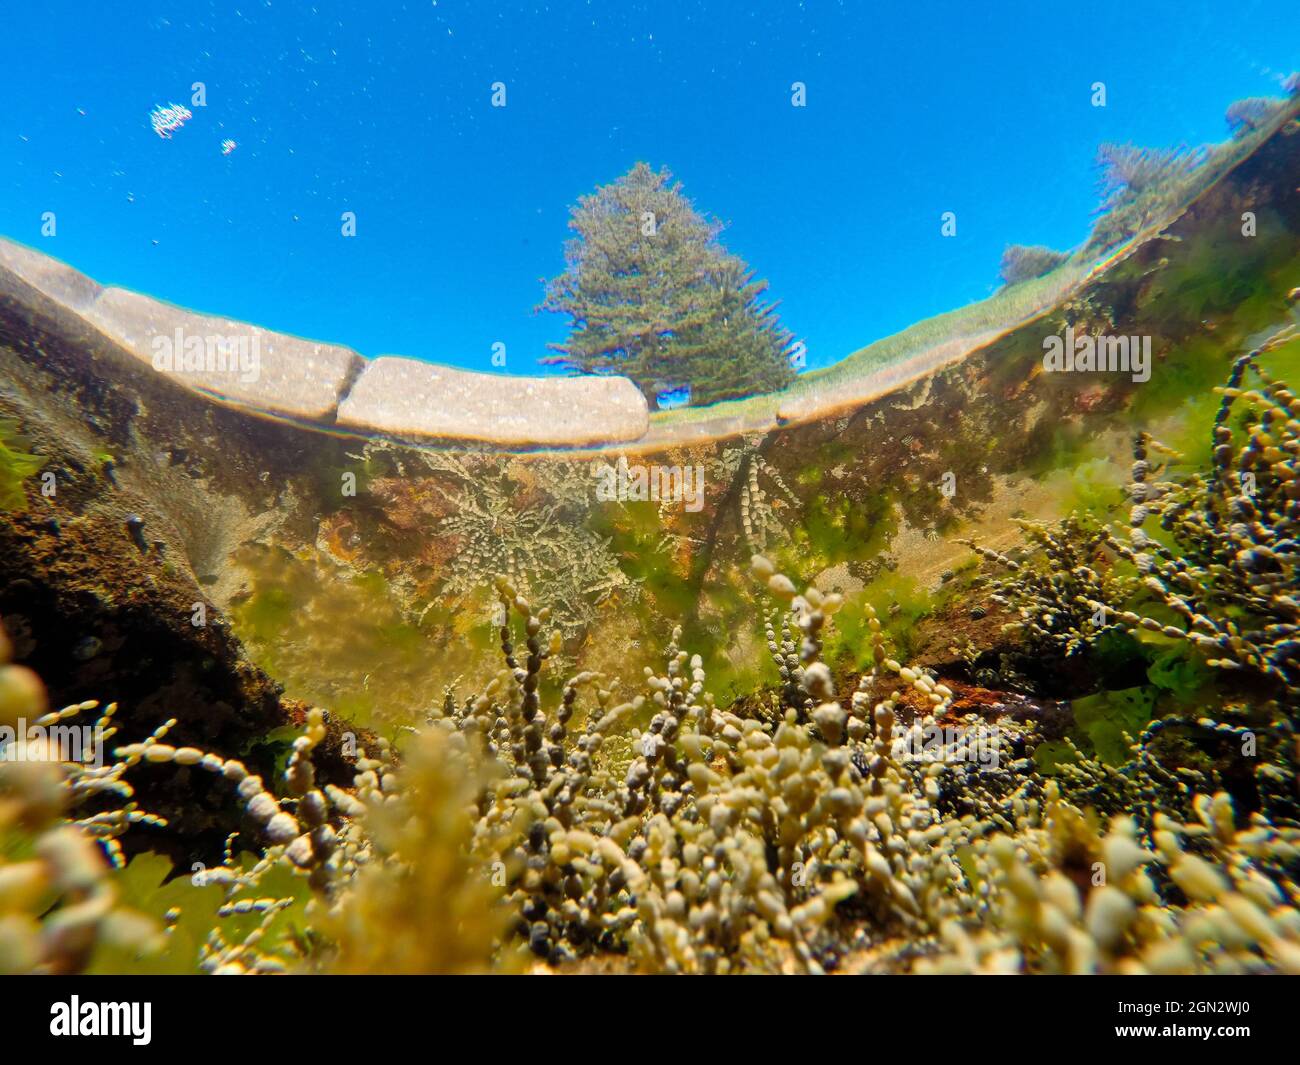 Rock pool, viewed from below with Neptune’s necklace (Hormosira banksii), The pool also contains Sea lettuce (Ulva australis), an edible green alga on Stock Photo